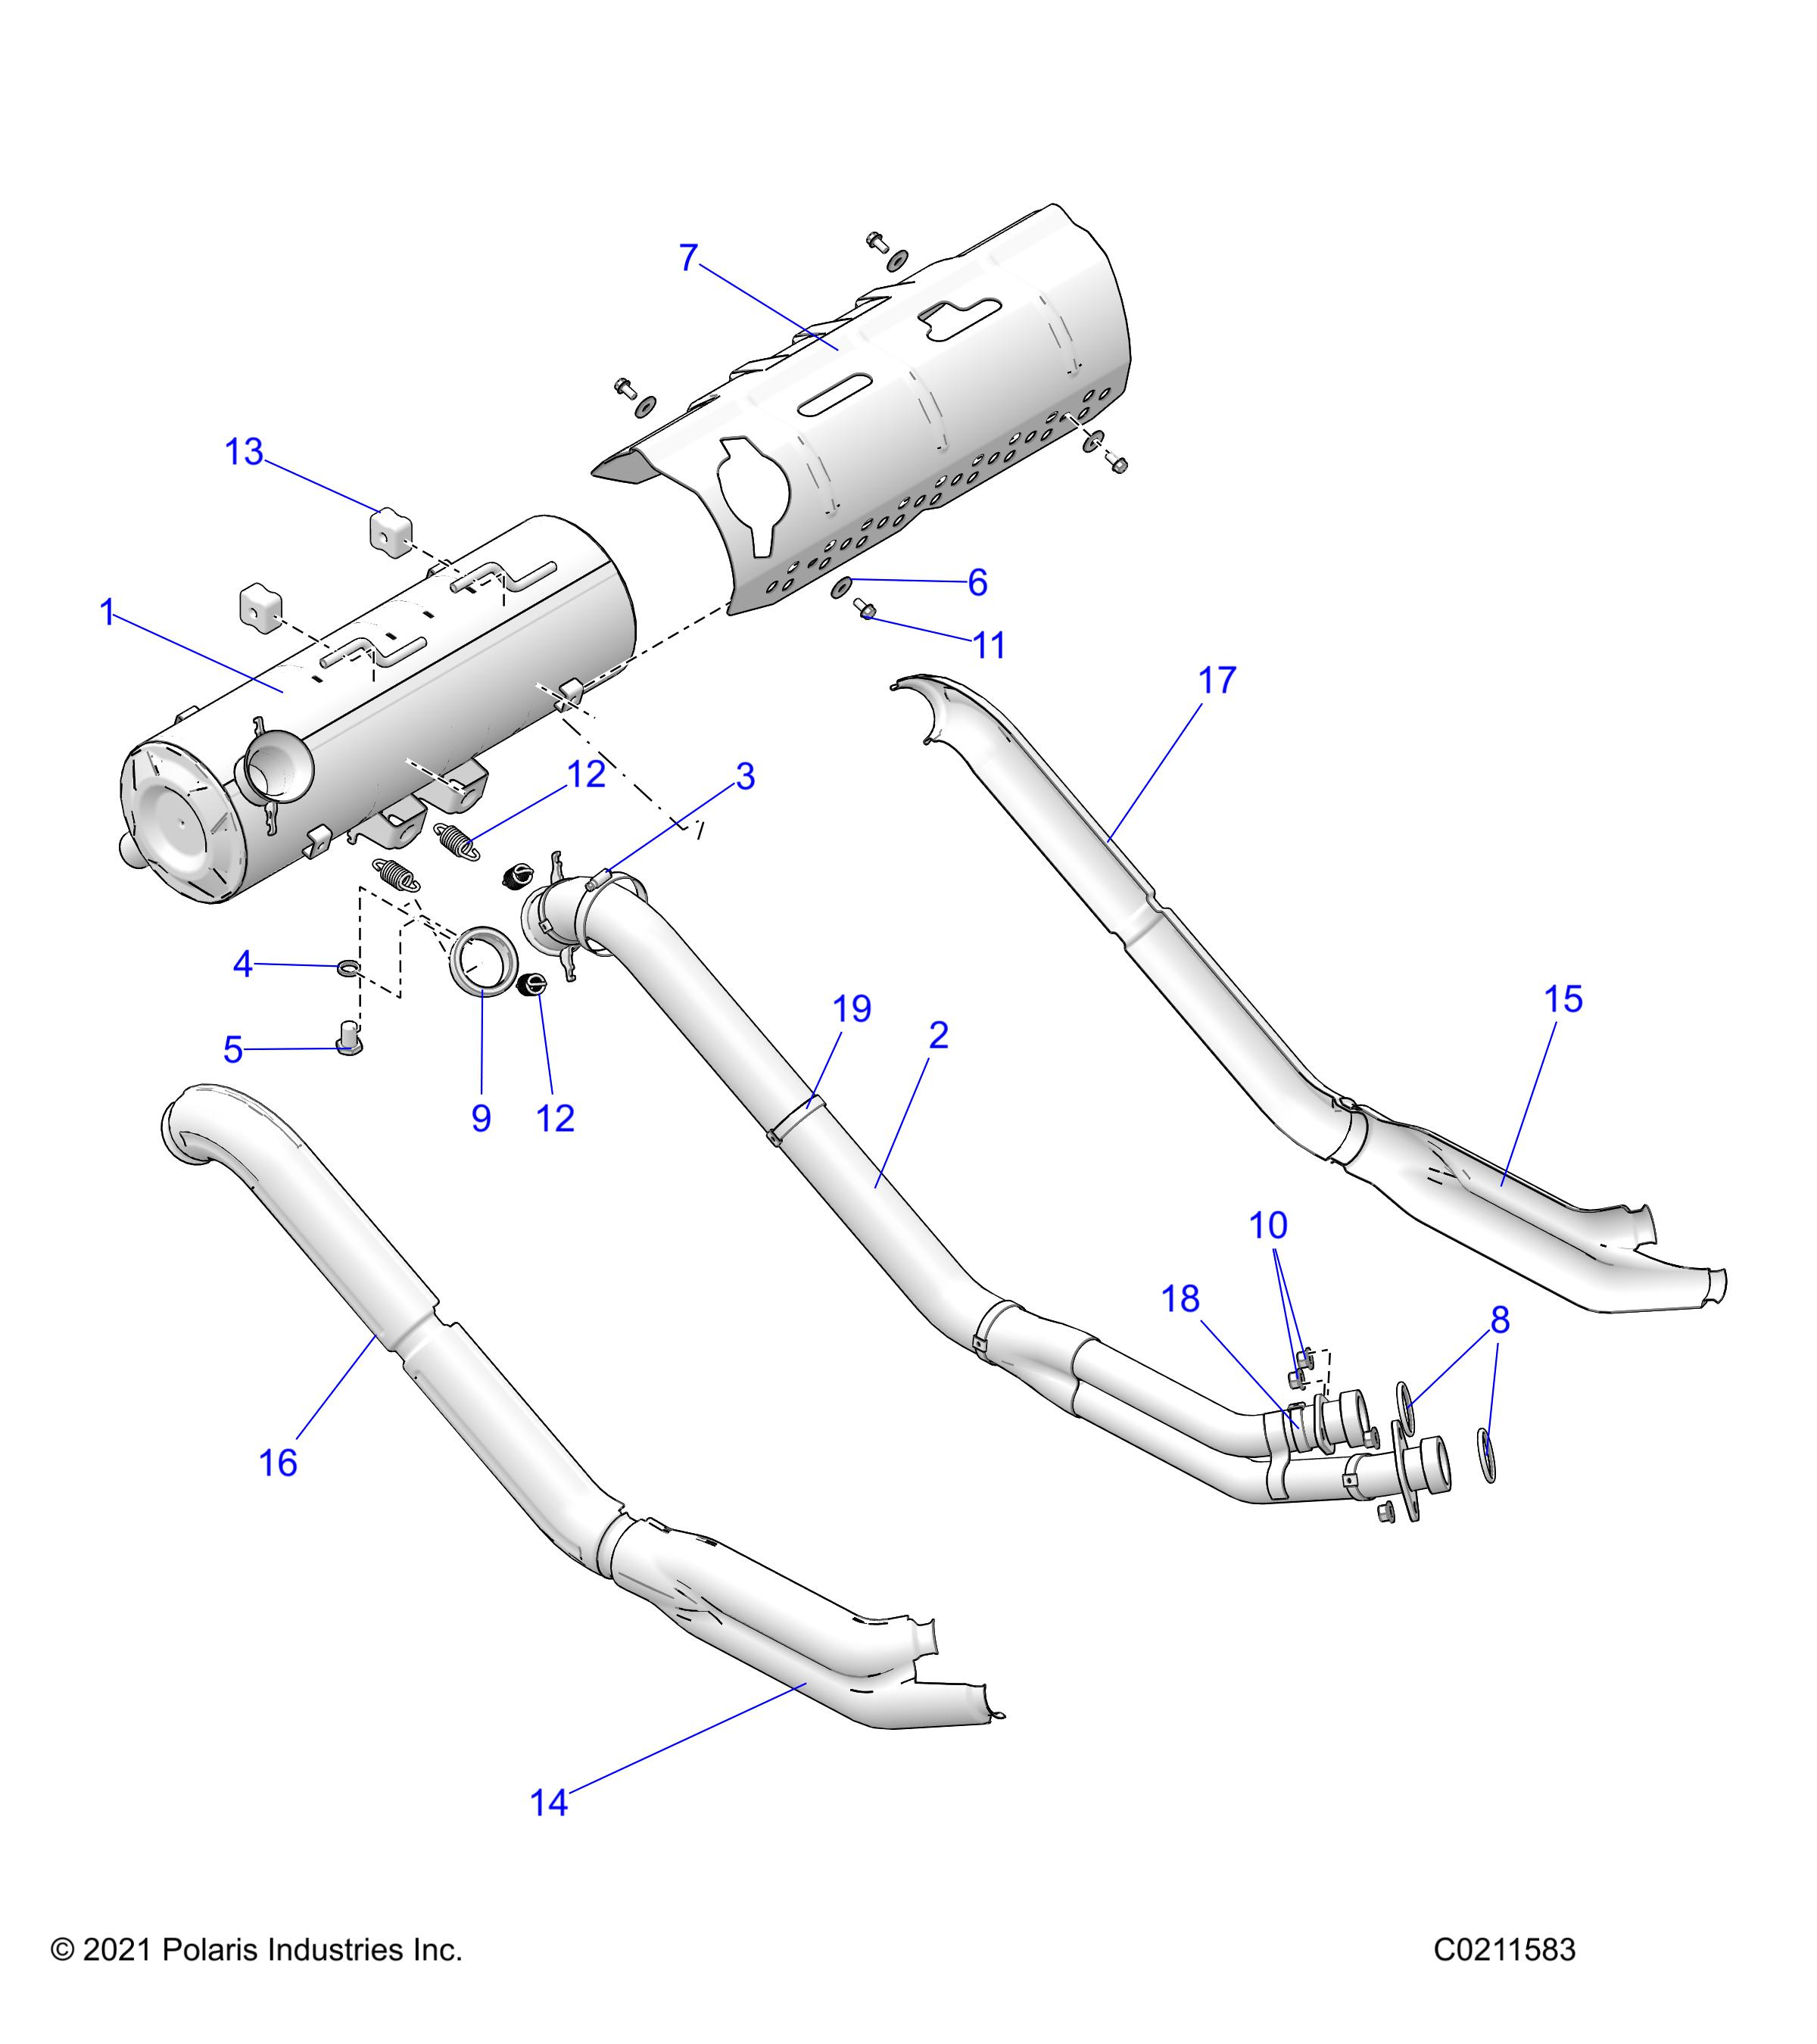 Part Number : 1263074 TWIN EXHAUST PIPE ASSEMBLY